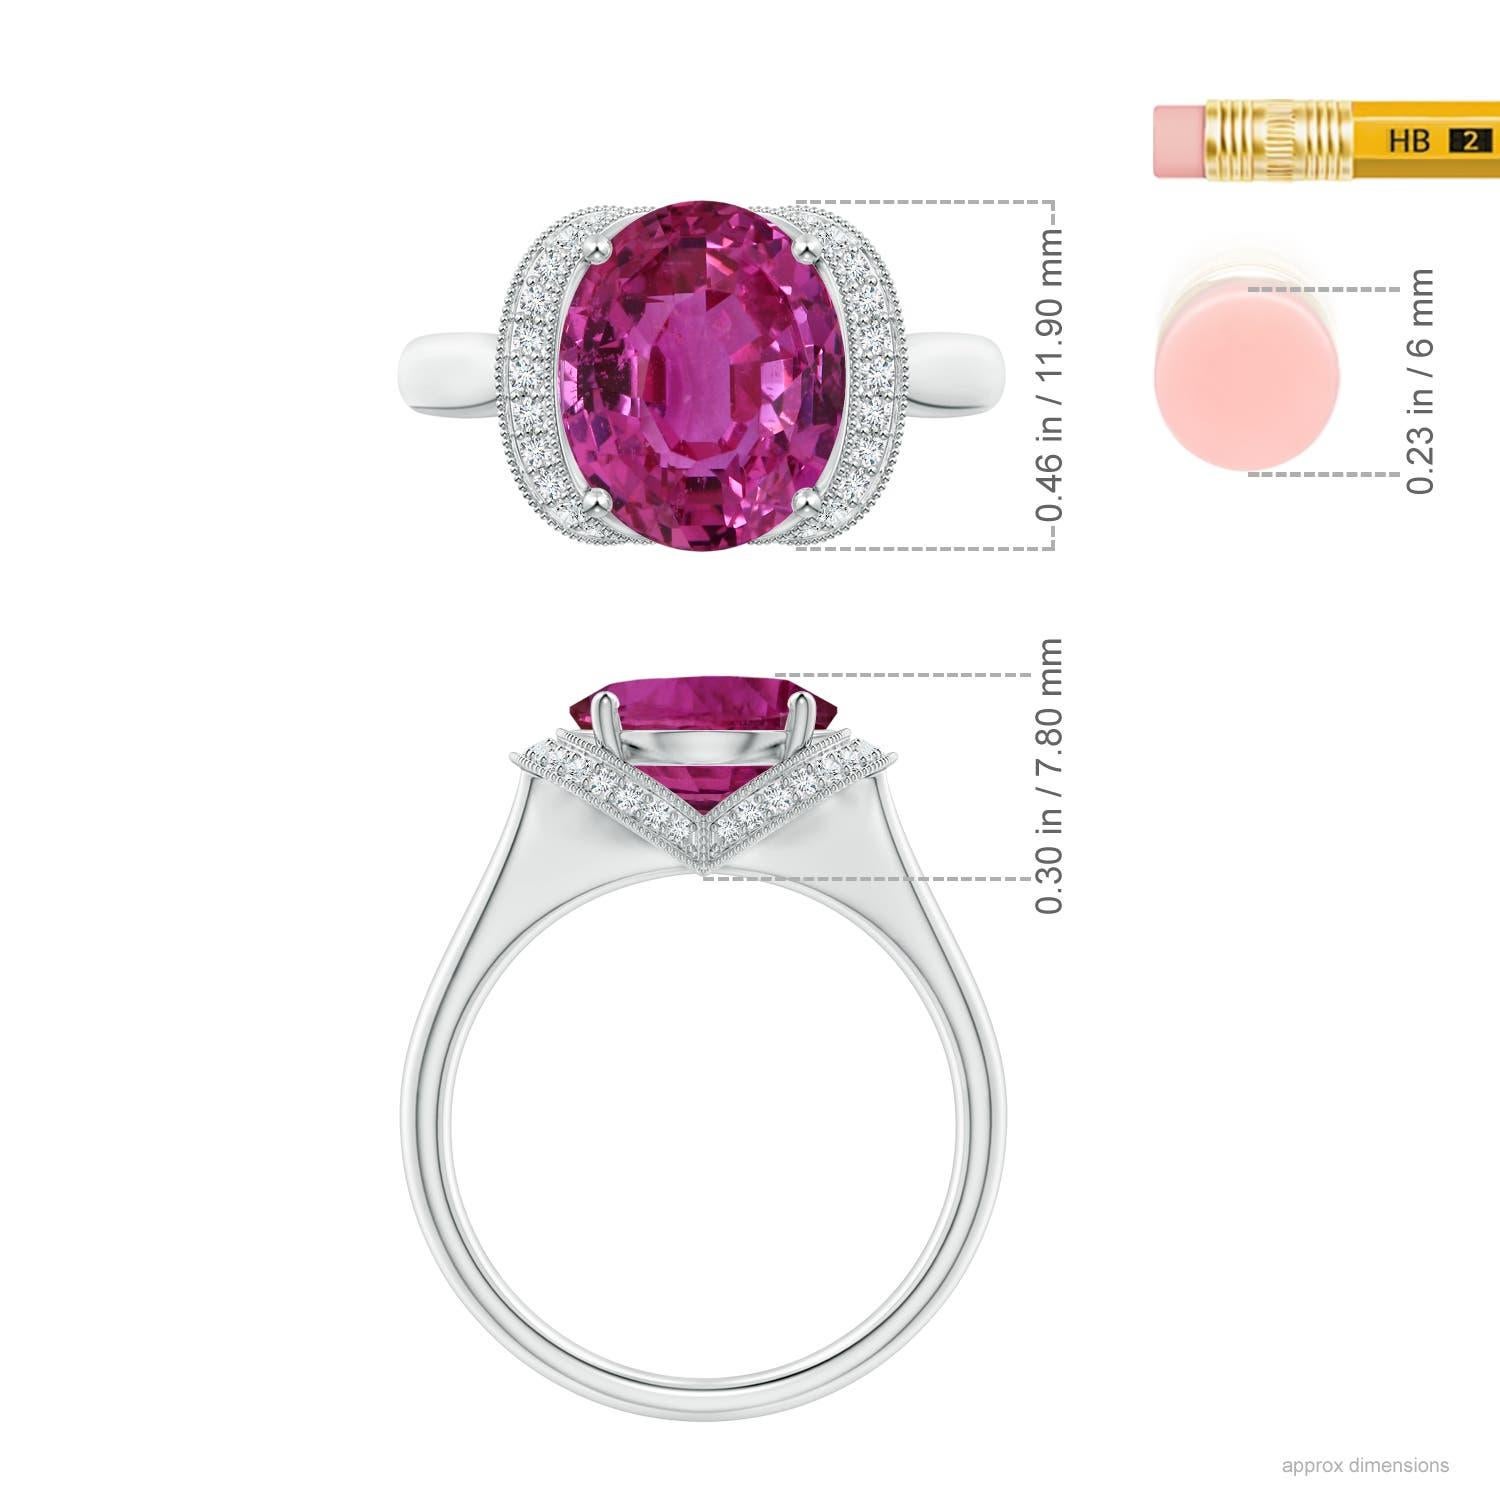 For Sale:  Angara Gia Certified Pink Sapphire Ring in White Gold with Diamond Half Halo 4